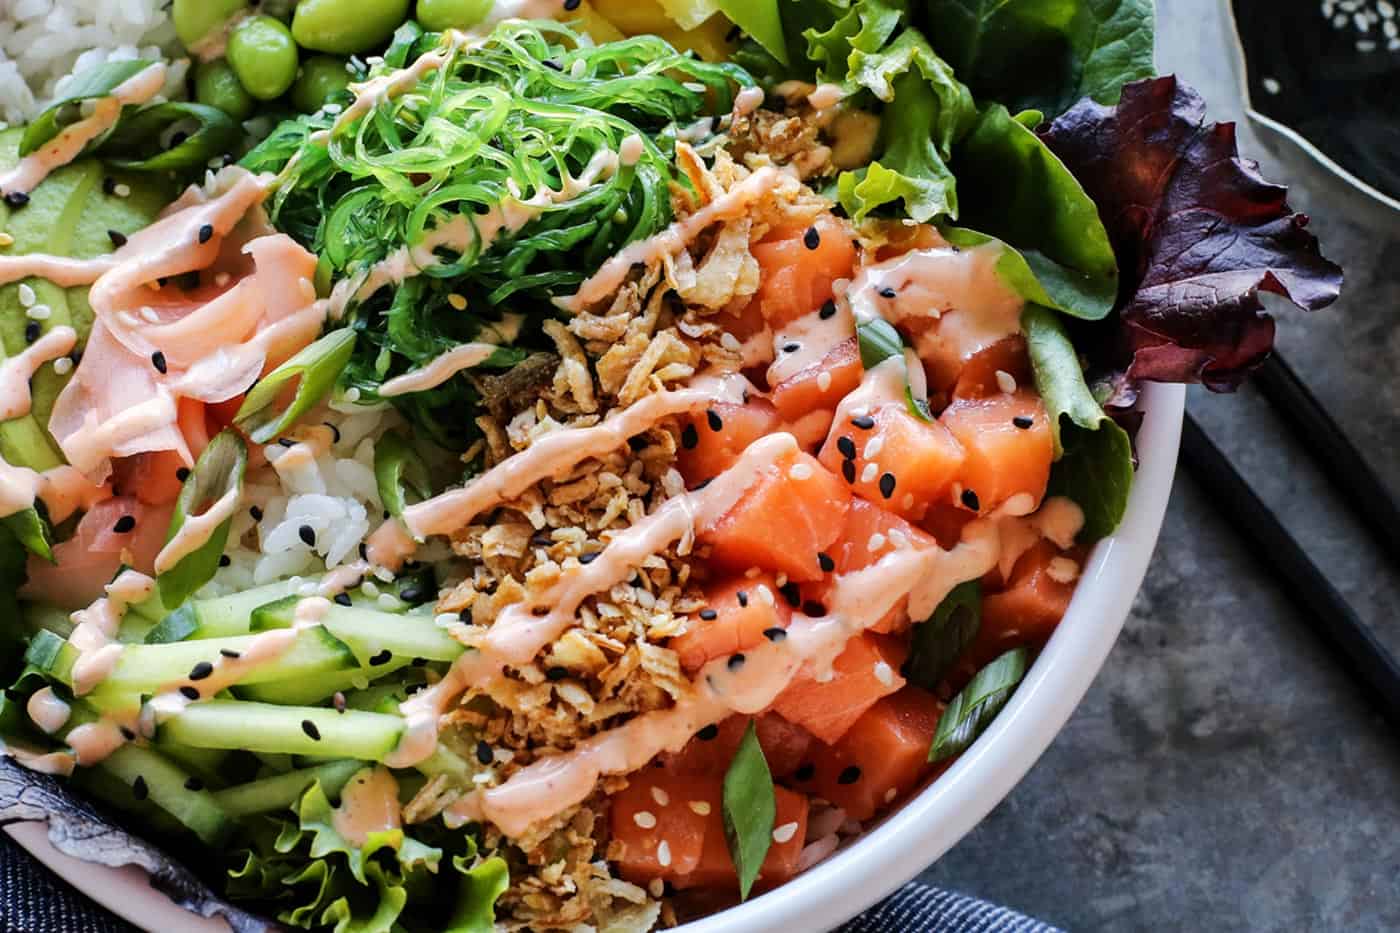 A white bowl filled with diced sushi grade fish, greens, rice and other poke ingredients